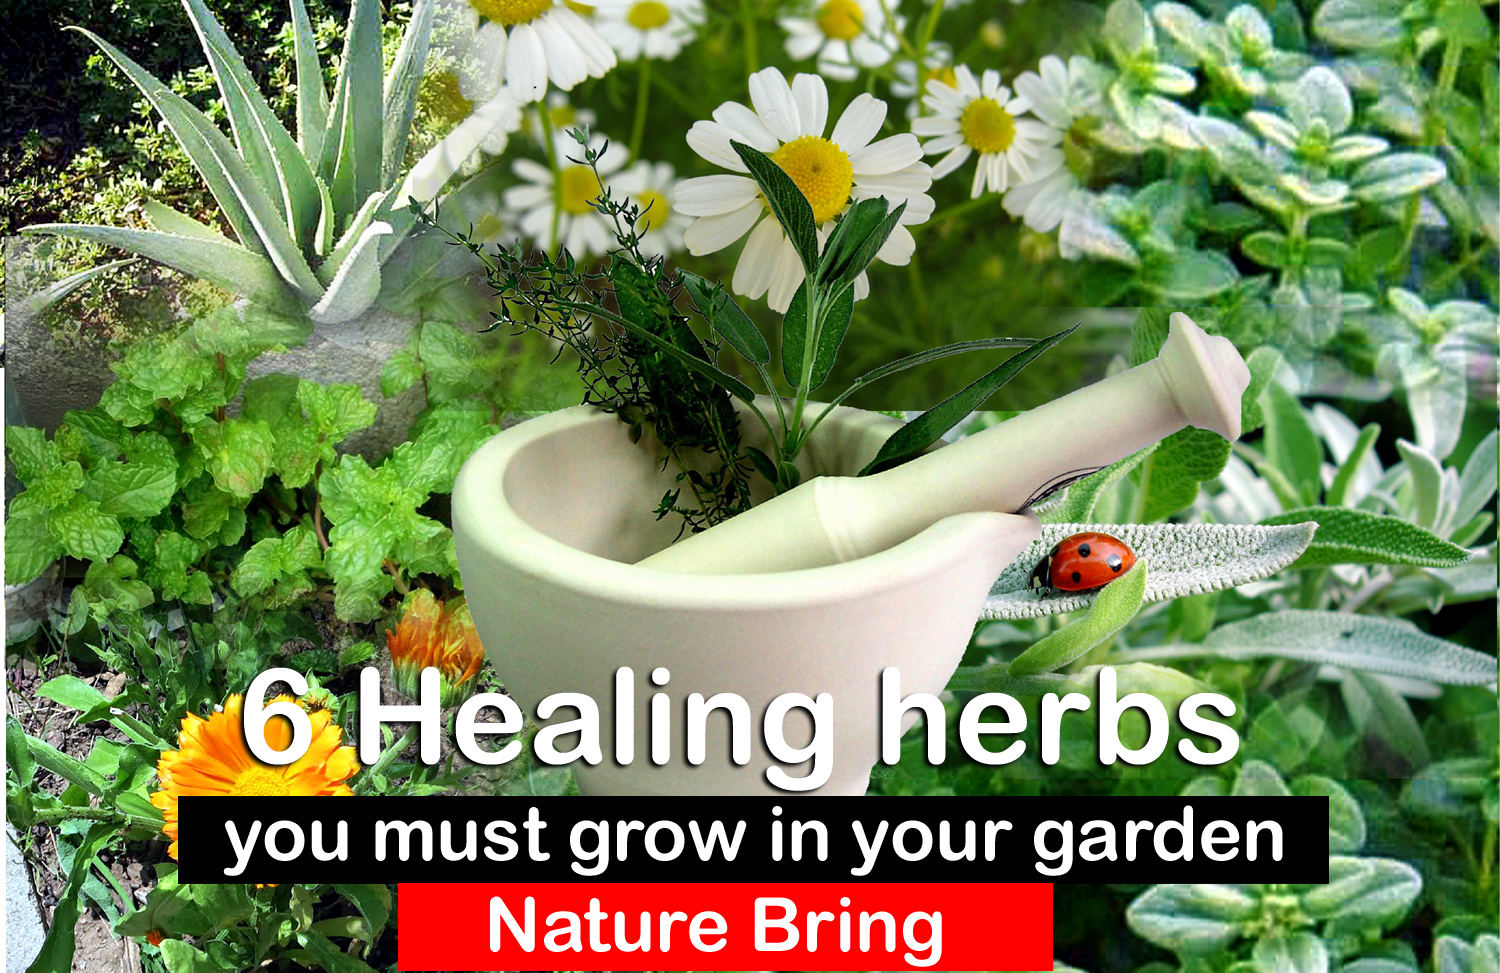 Open Our Wild Hearts to the Healing Herbs